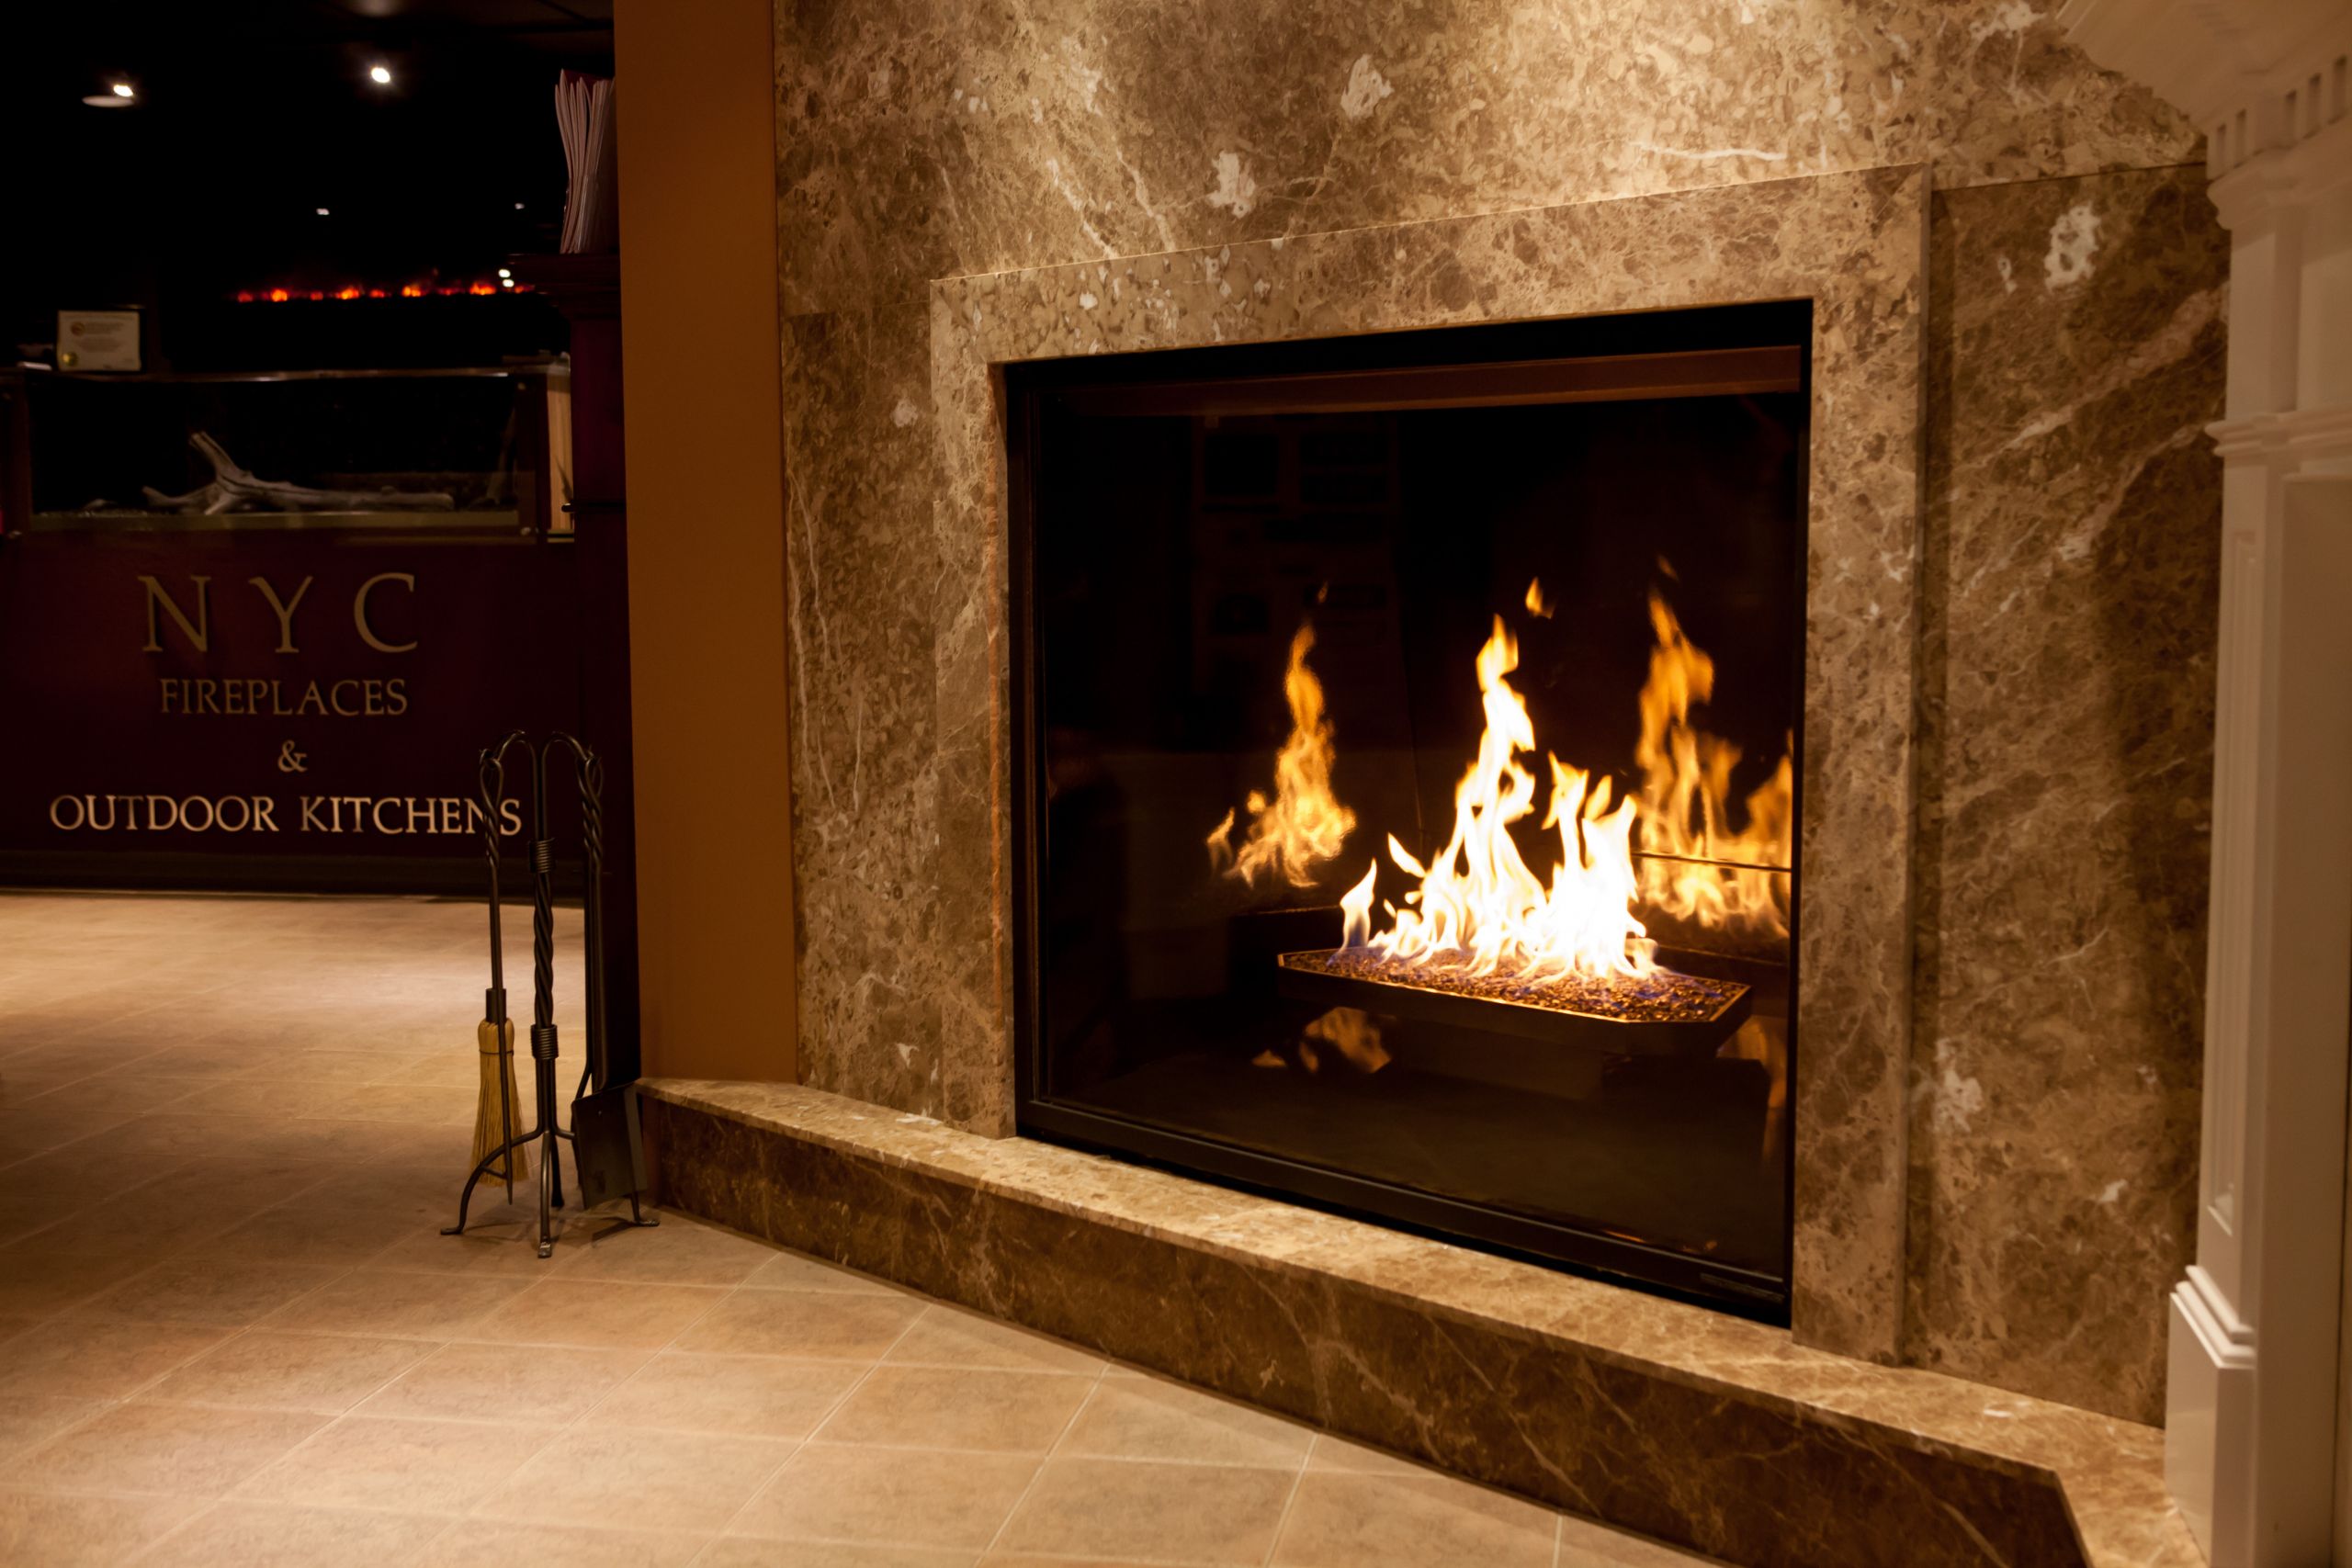 Nyc Fireplace And Outdoor Kitchen
 Gas Electric and Wood Fireplaces